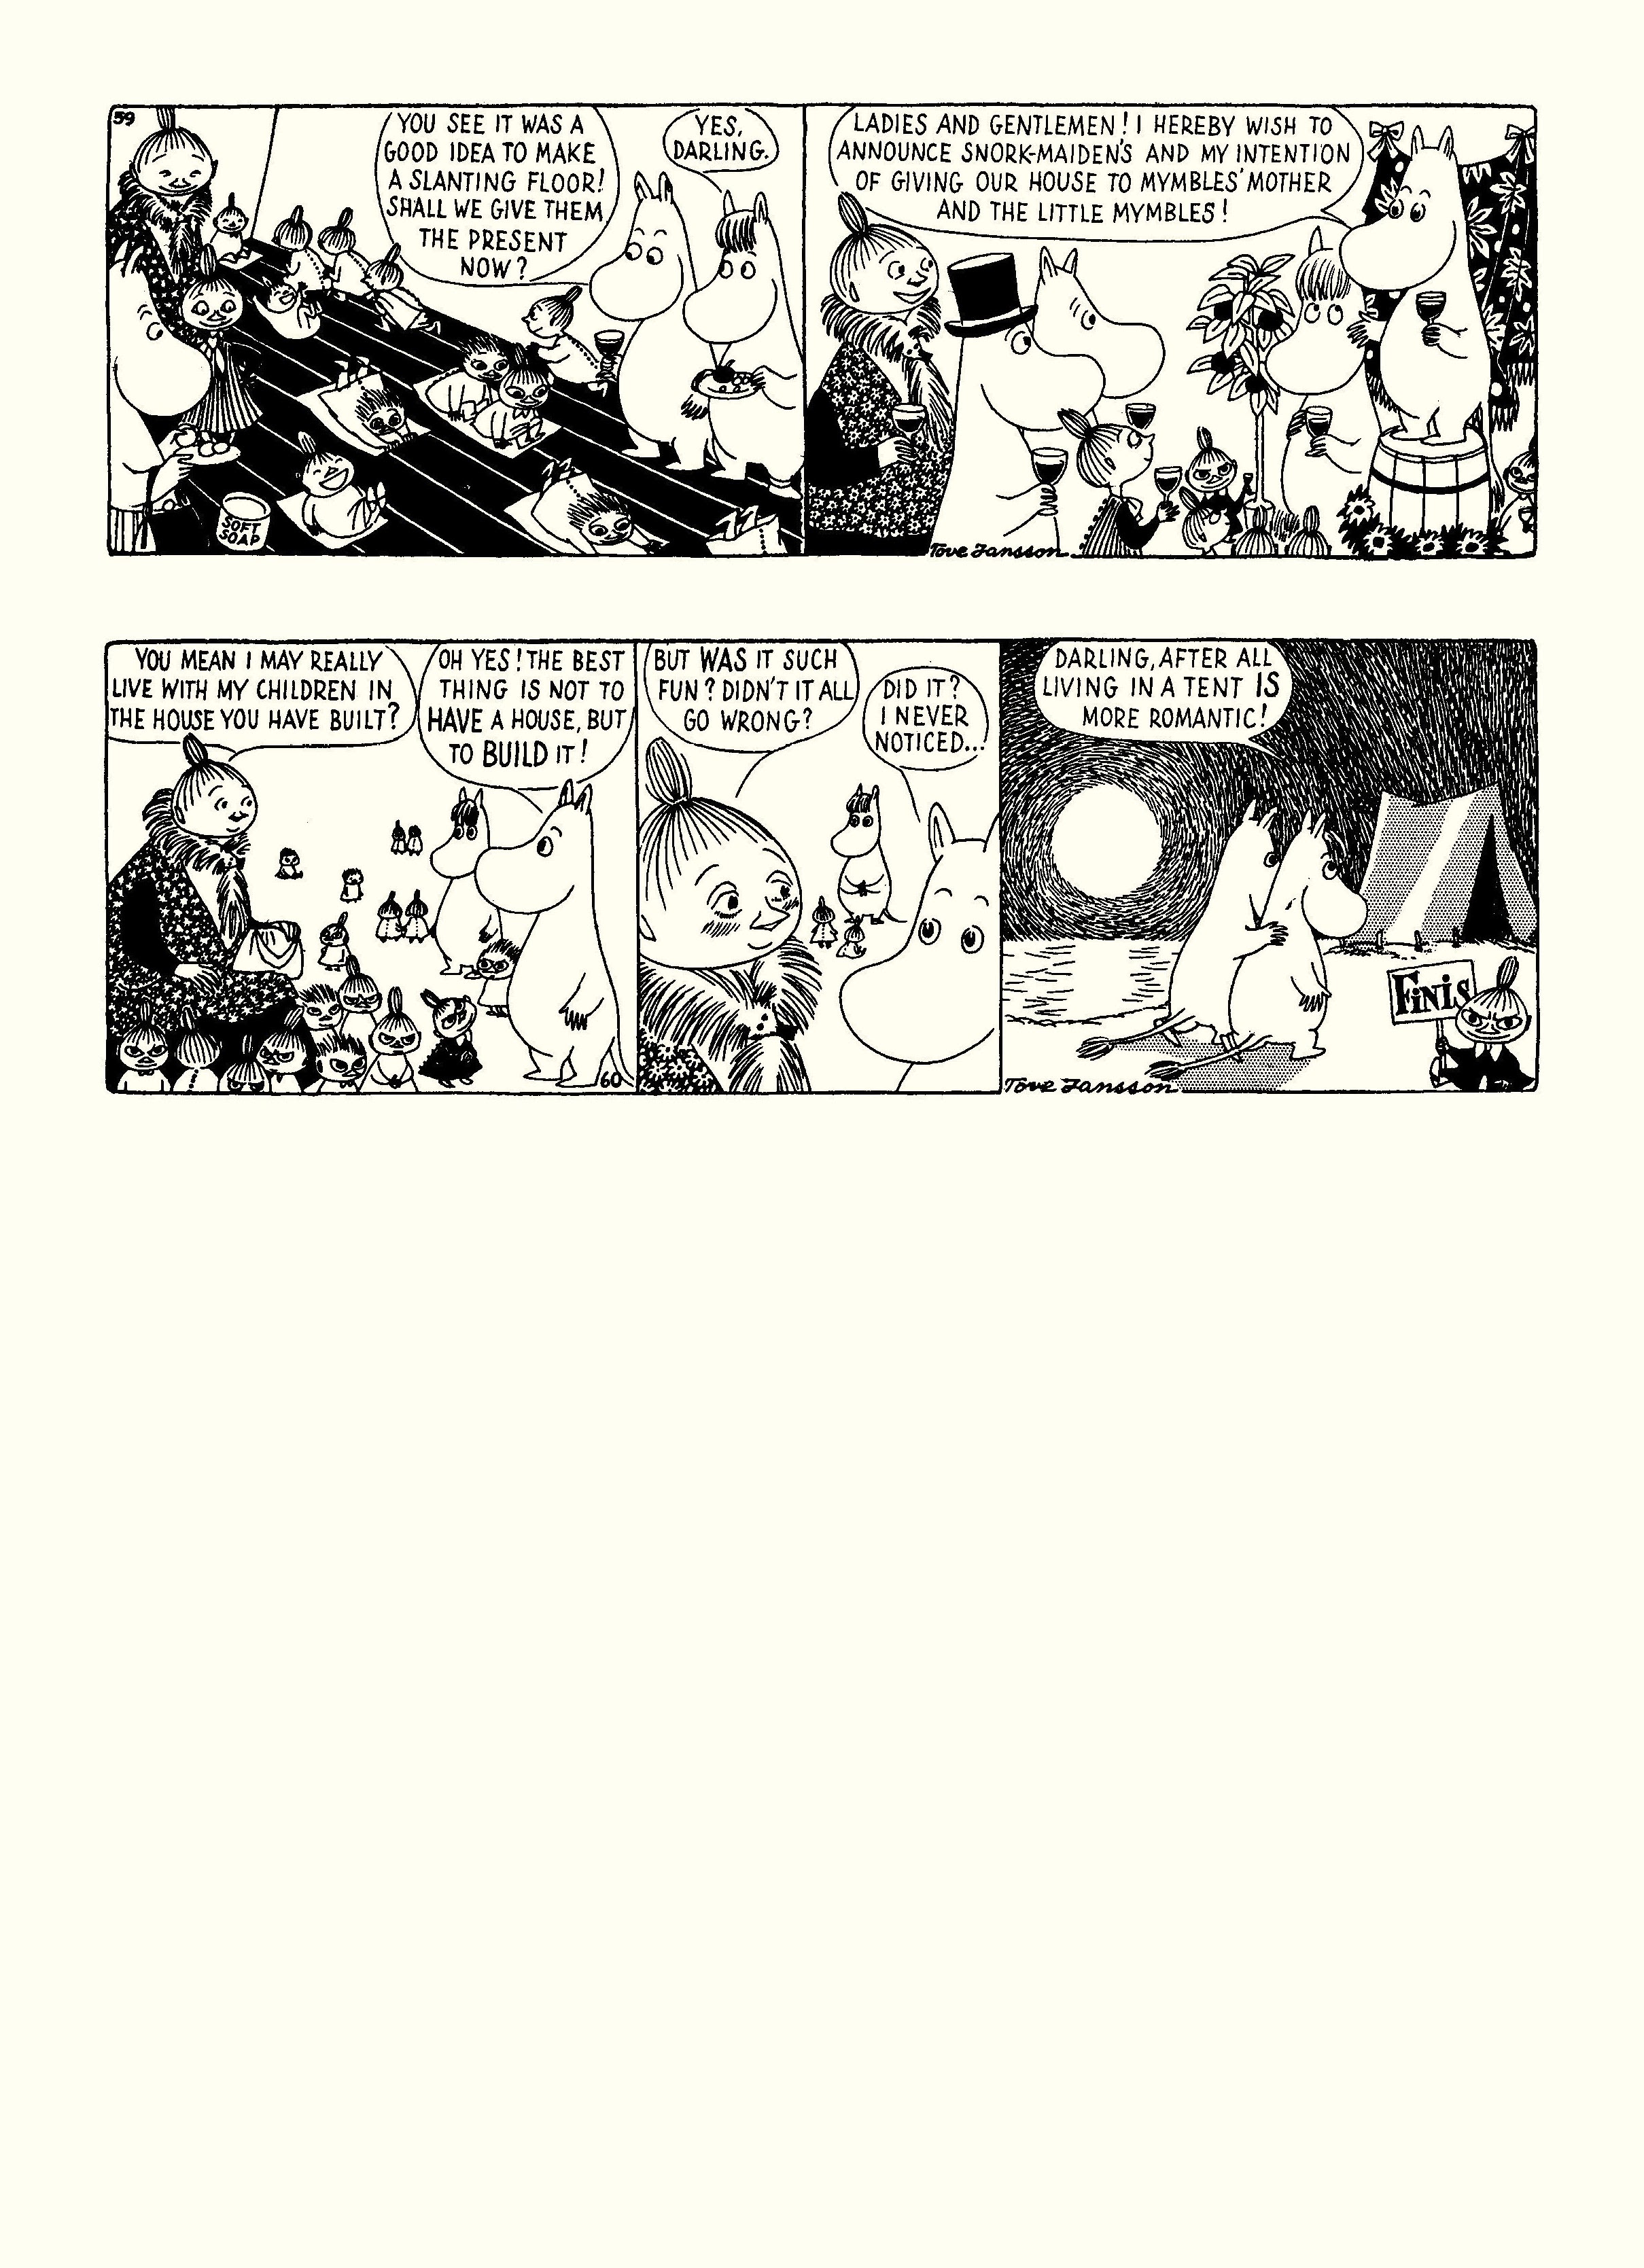 Read online Moomin: The Complete Tove Jansson Comic Strip comic -  Issue # TPB 2 - 63